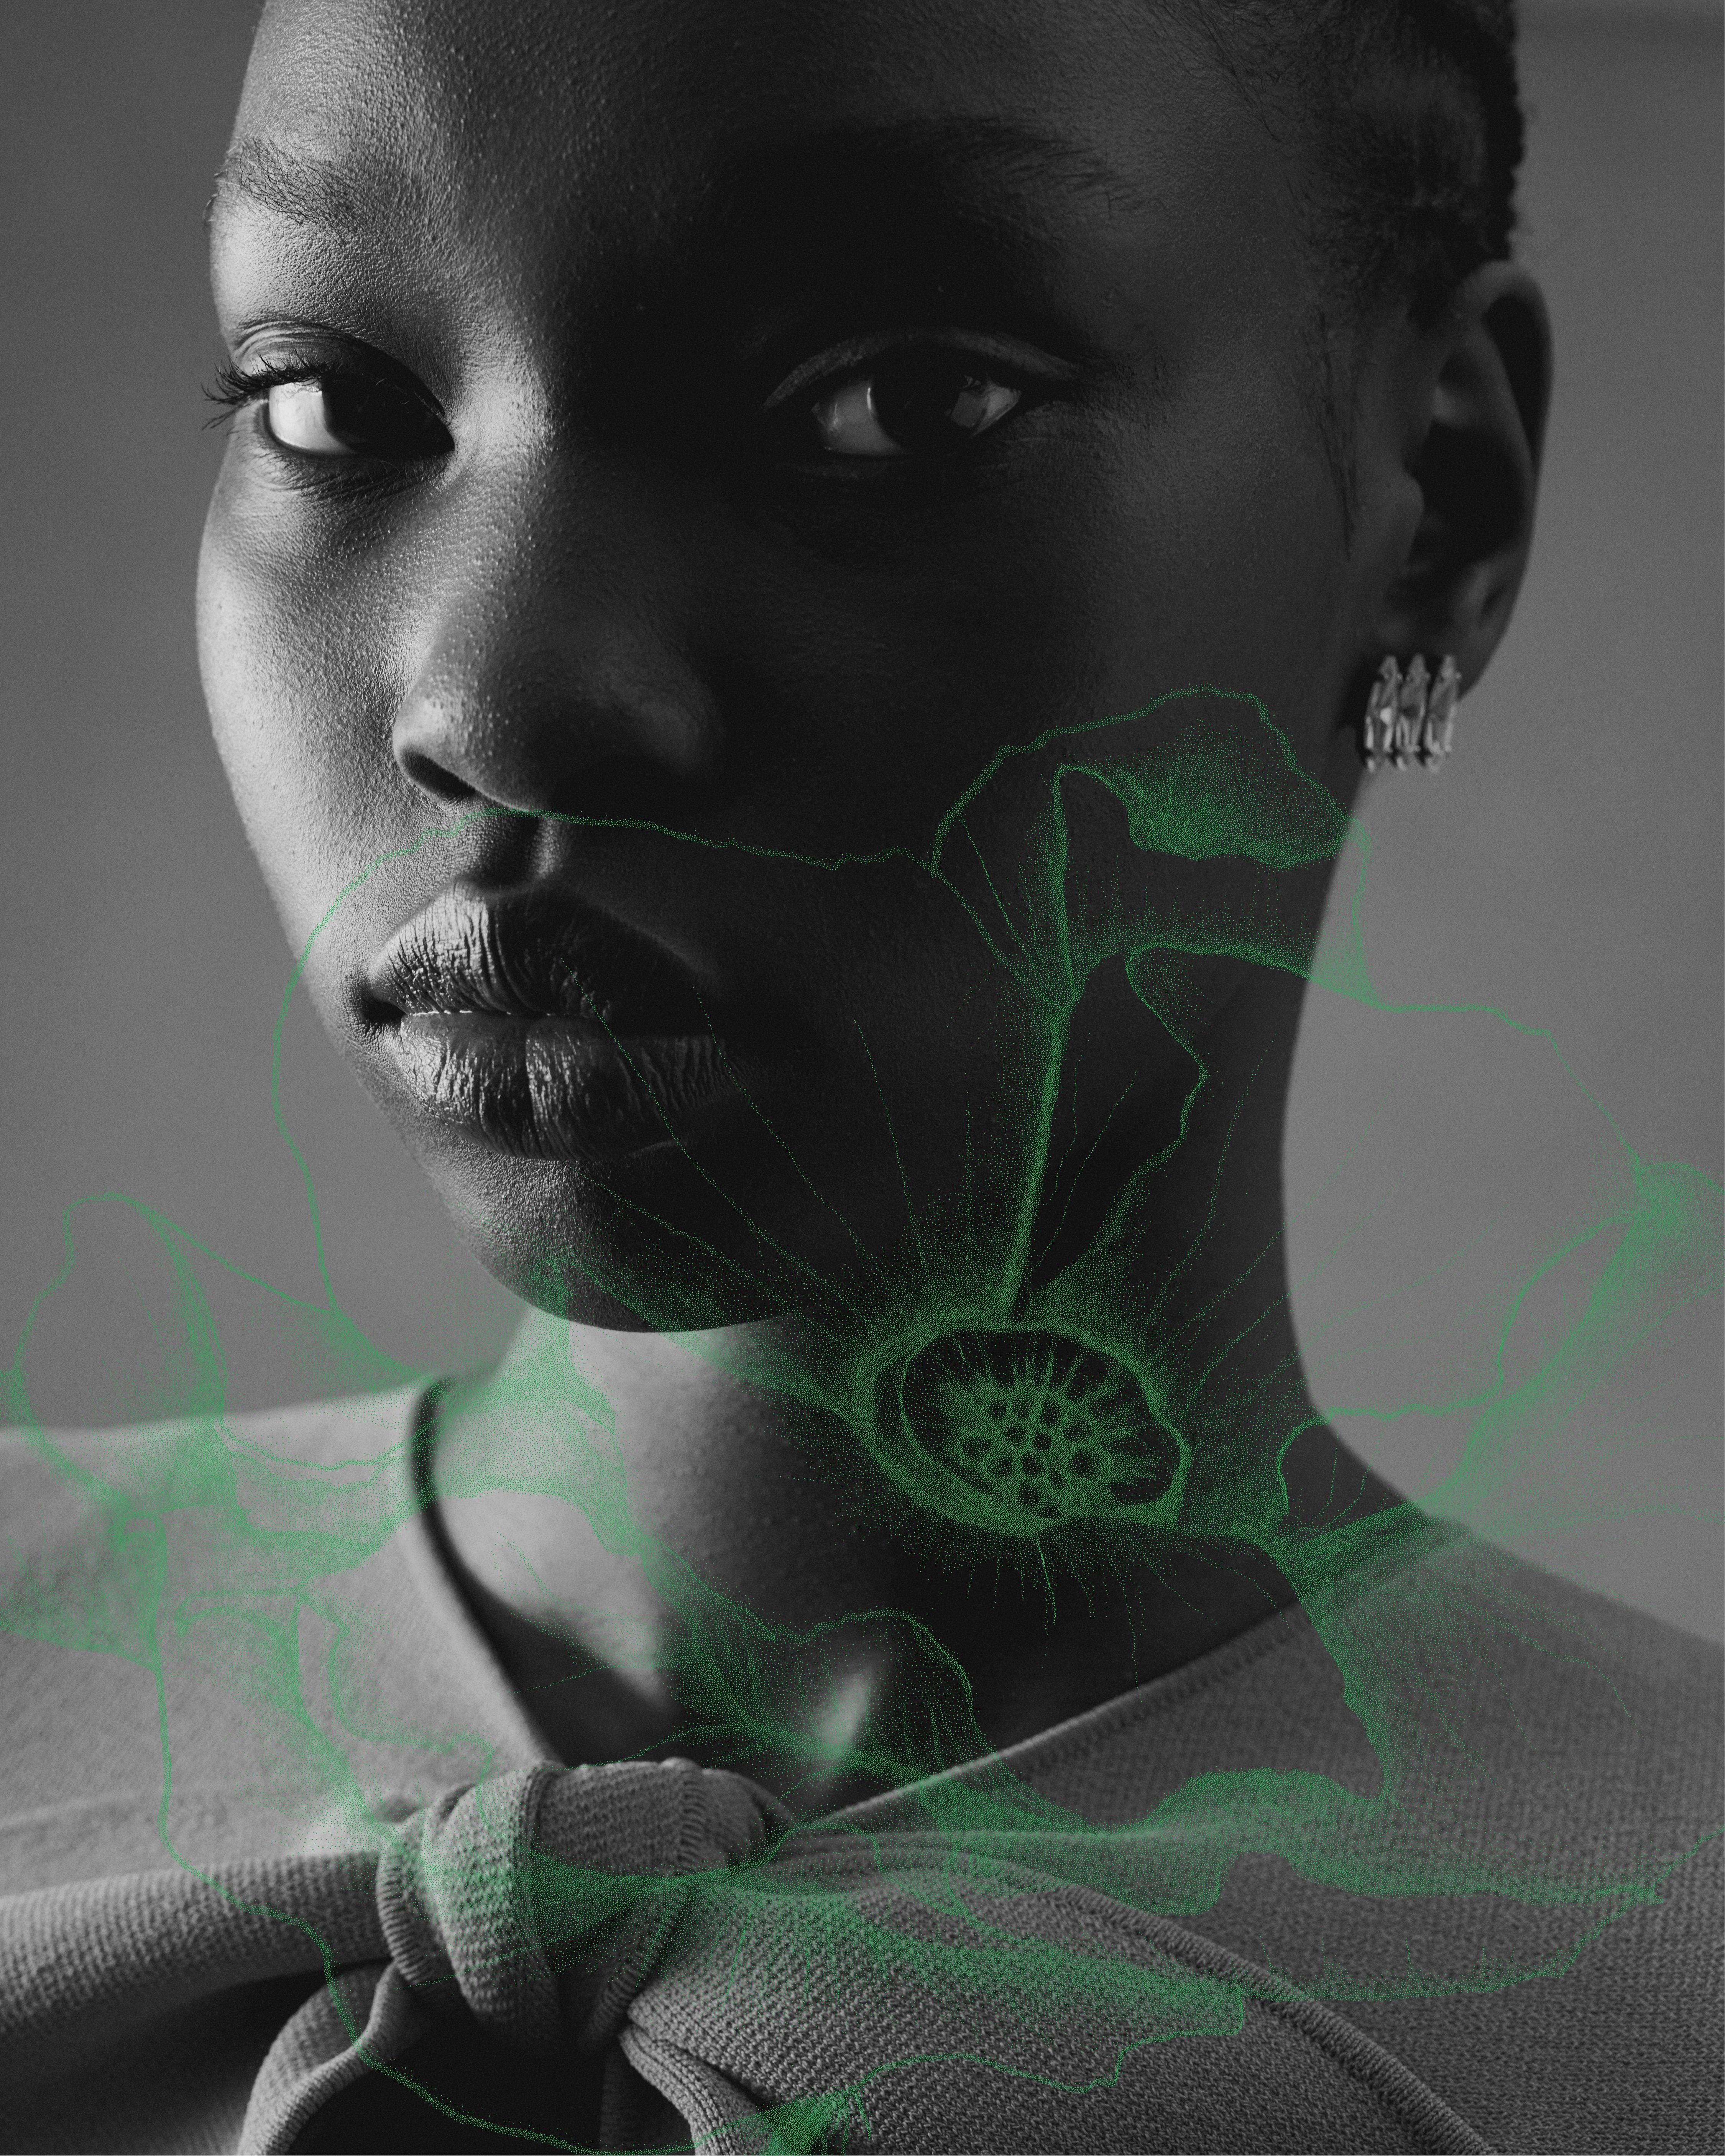 Black and white close up of model's face with green poppy ilustration overlaid on top